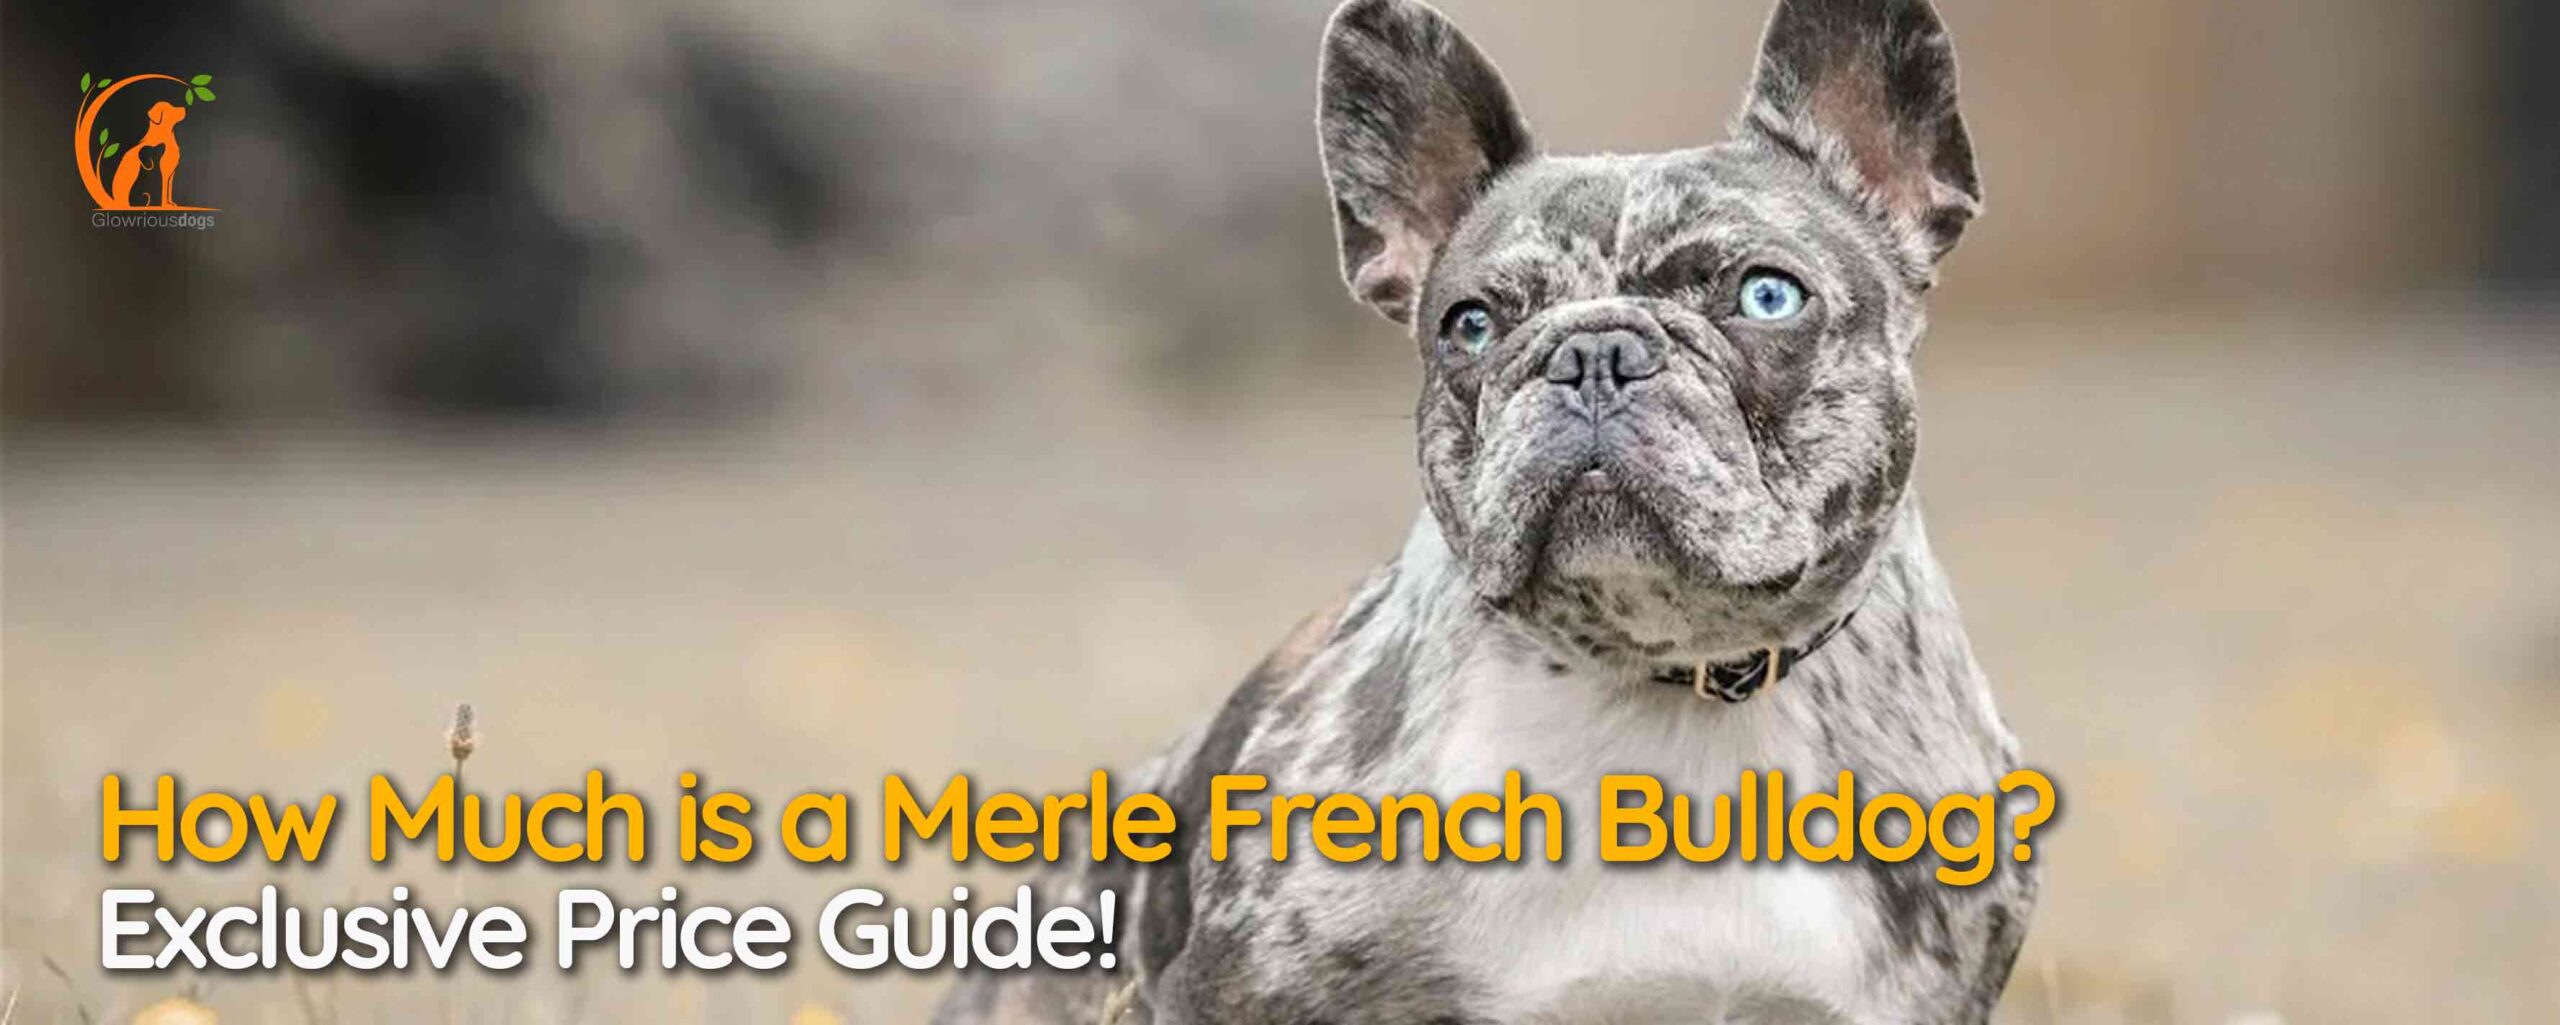 How Much is a Merle French Bulldog? Exclusive Price Guide!